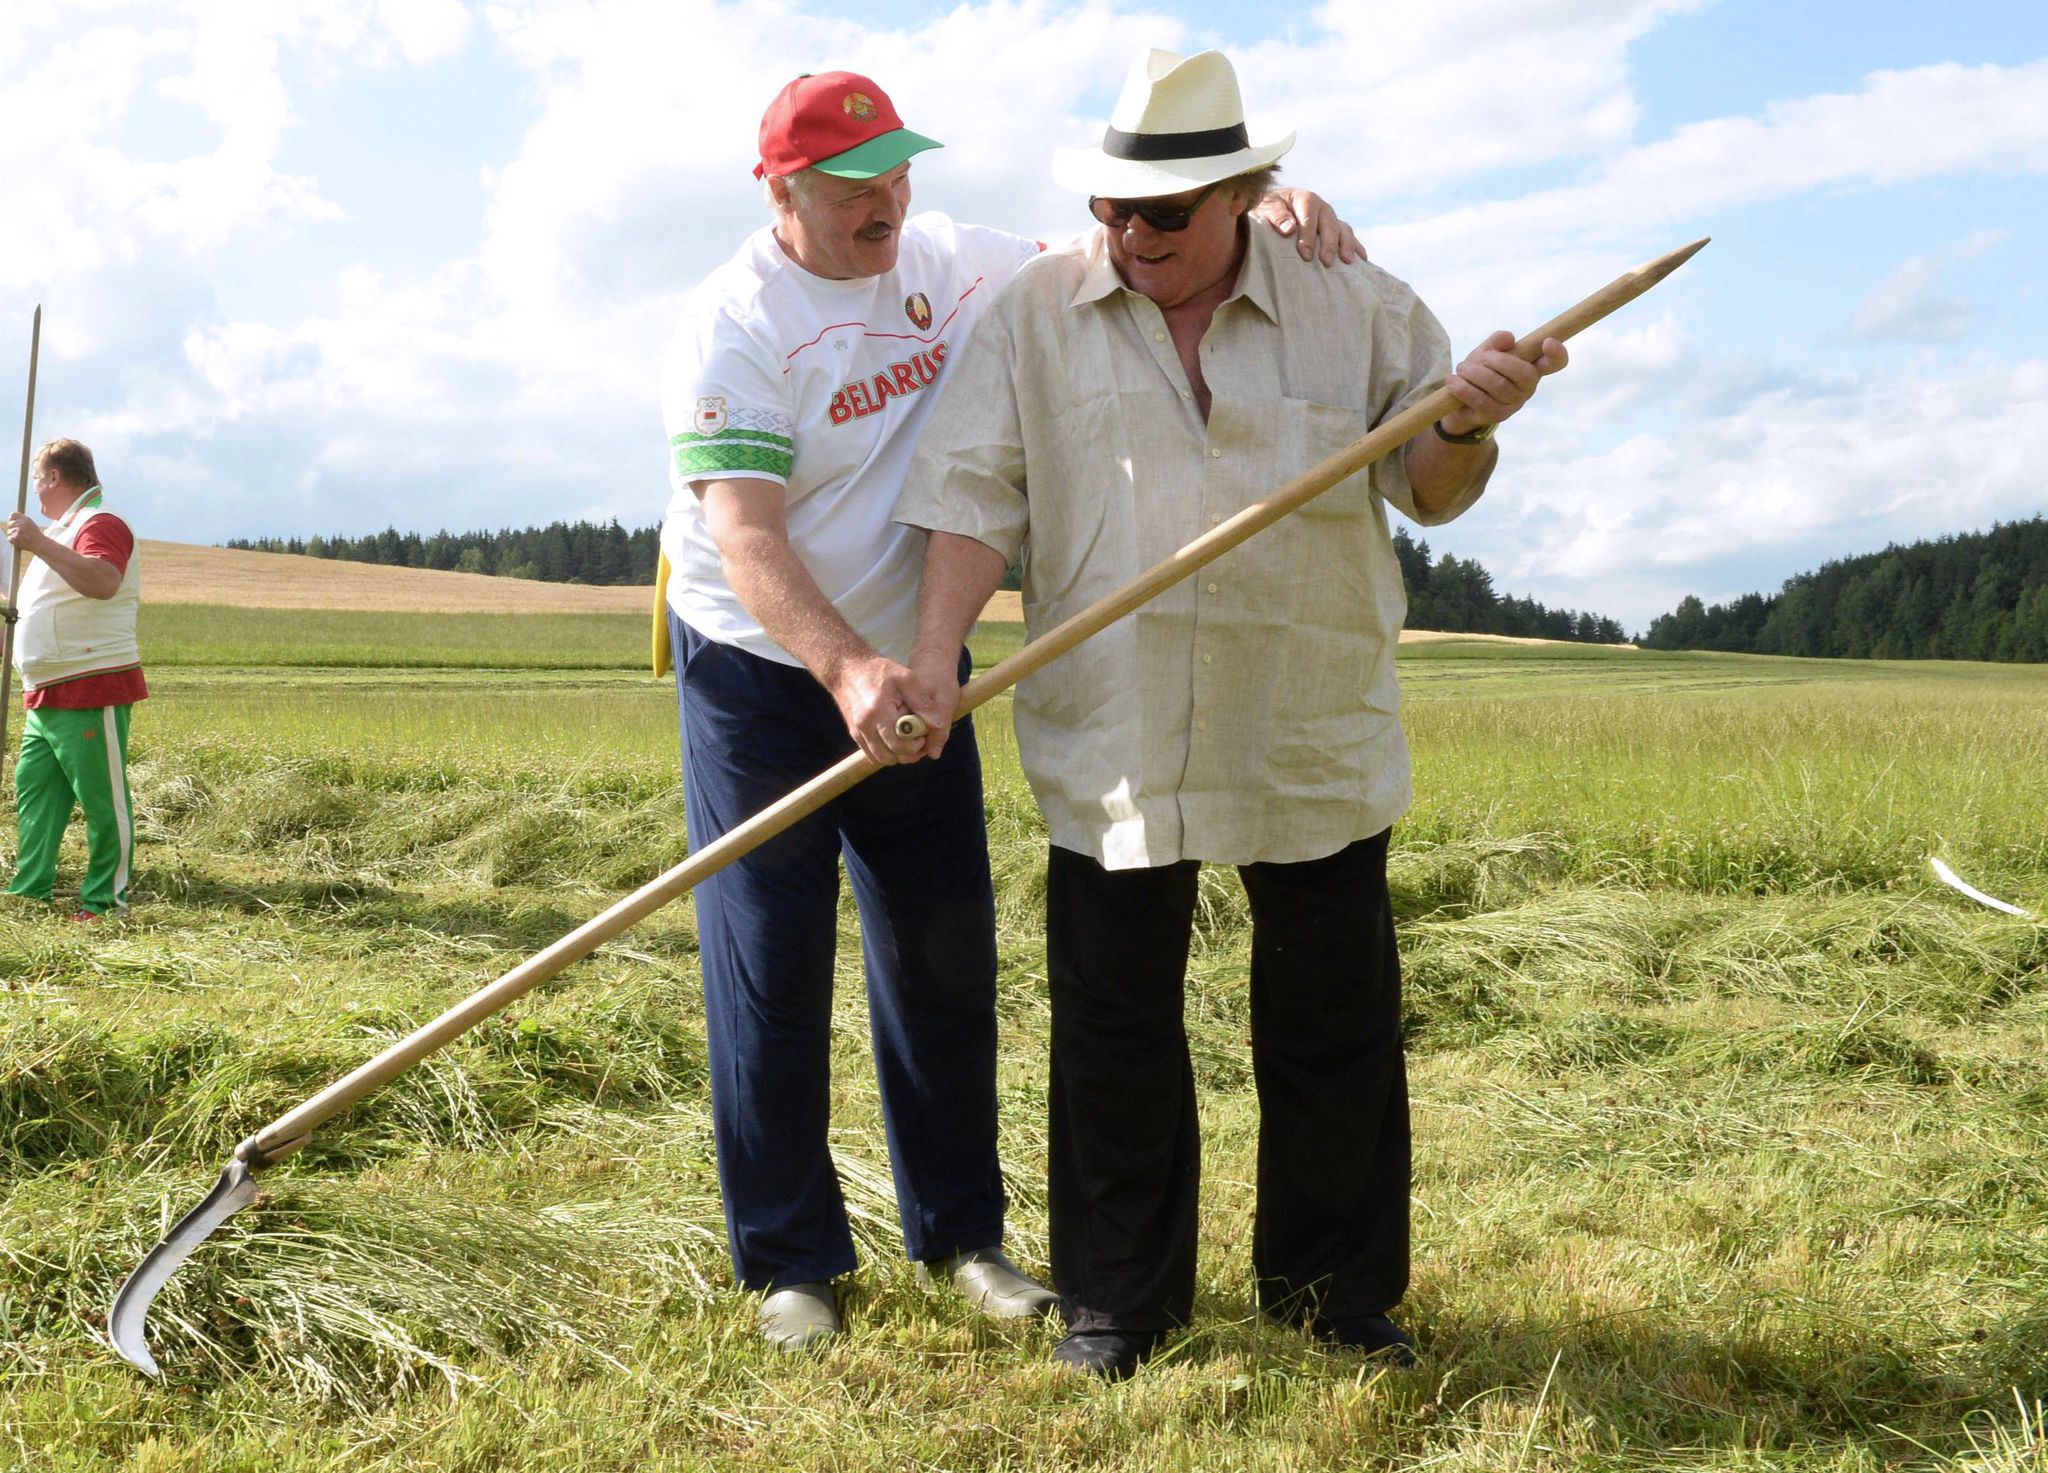 Belarus' President Alexander Lukashenko (L) teaches French actor Gerard Depardieu how to scythe at his official residence Ozerny, outside Minsk